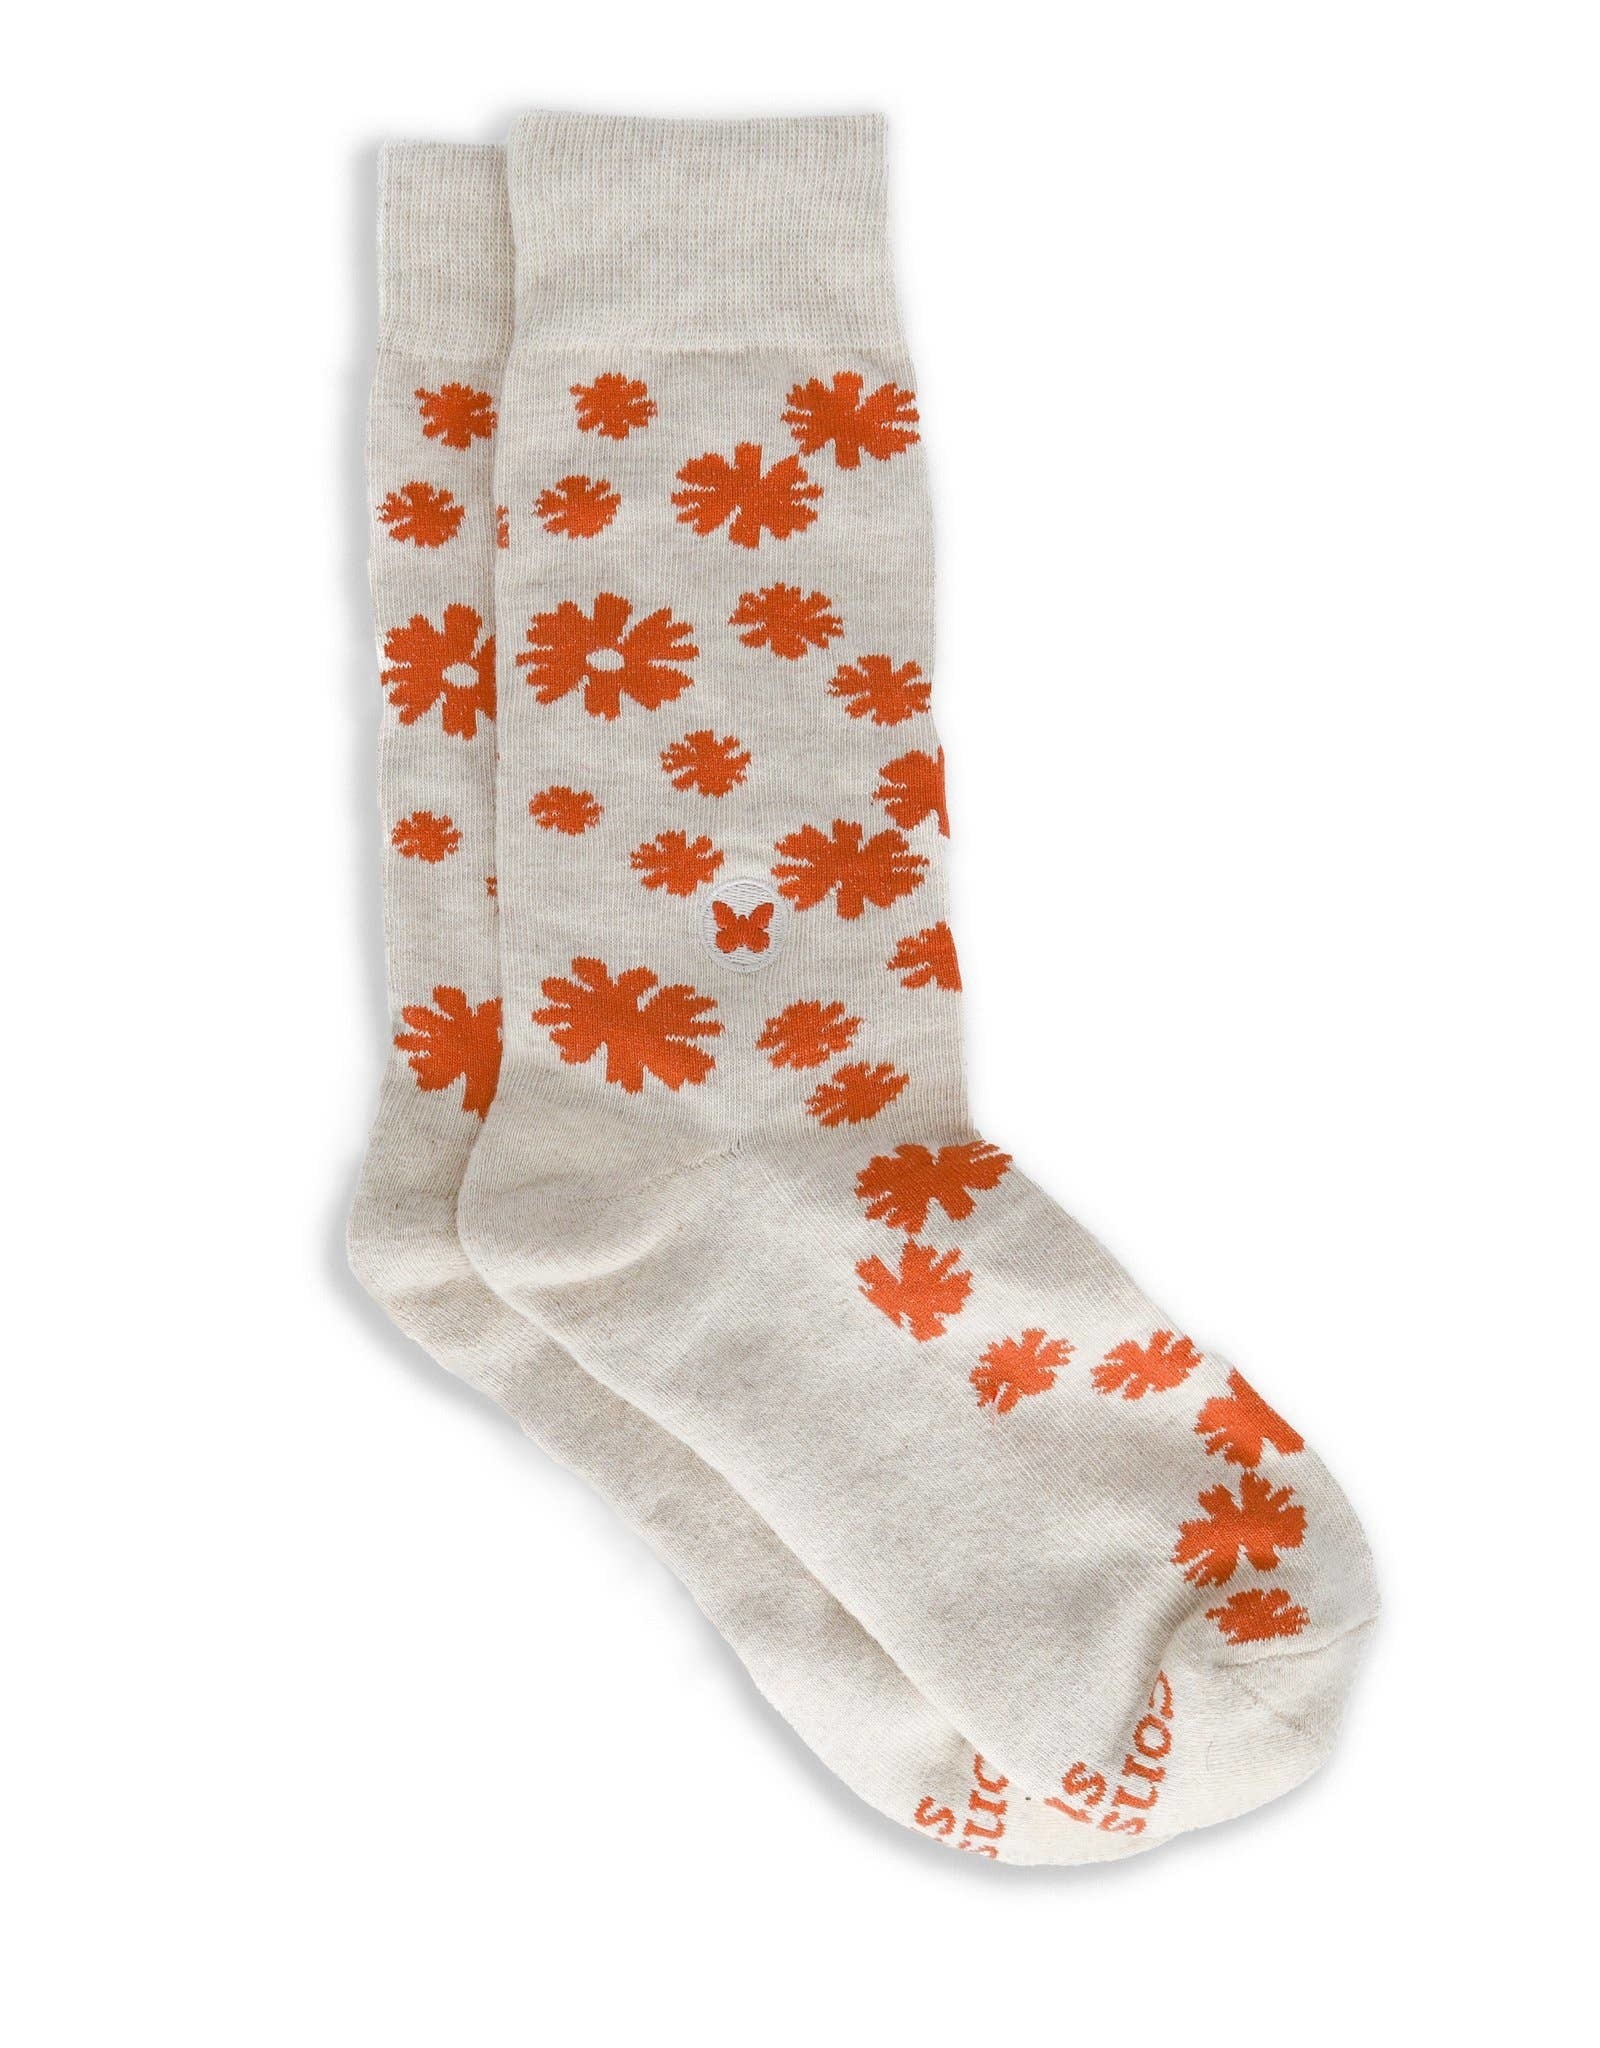 Conscious Step Socks that Stop Violence Against Women (Floral)